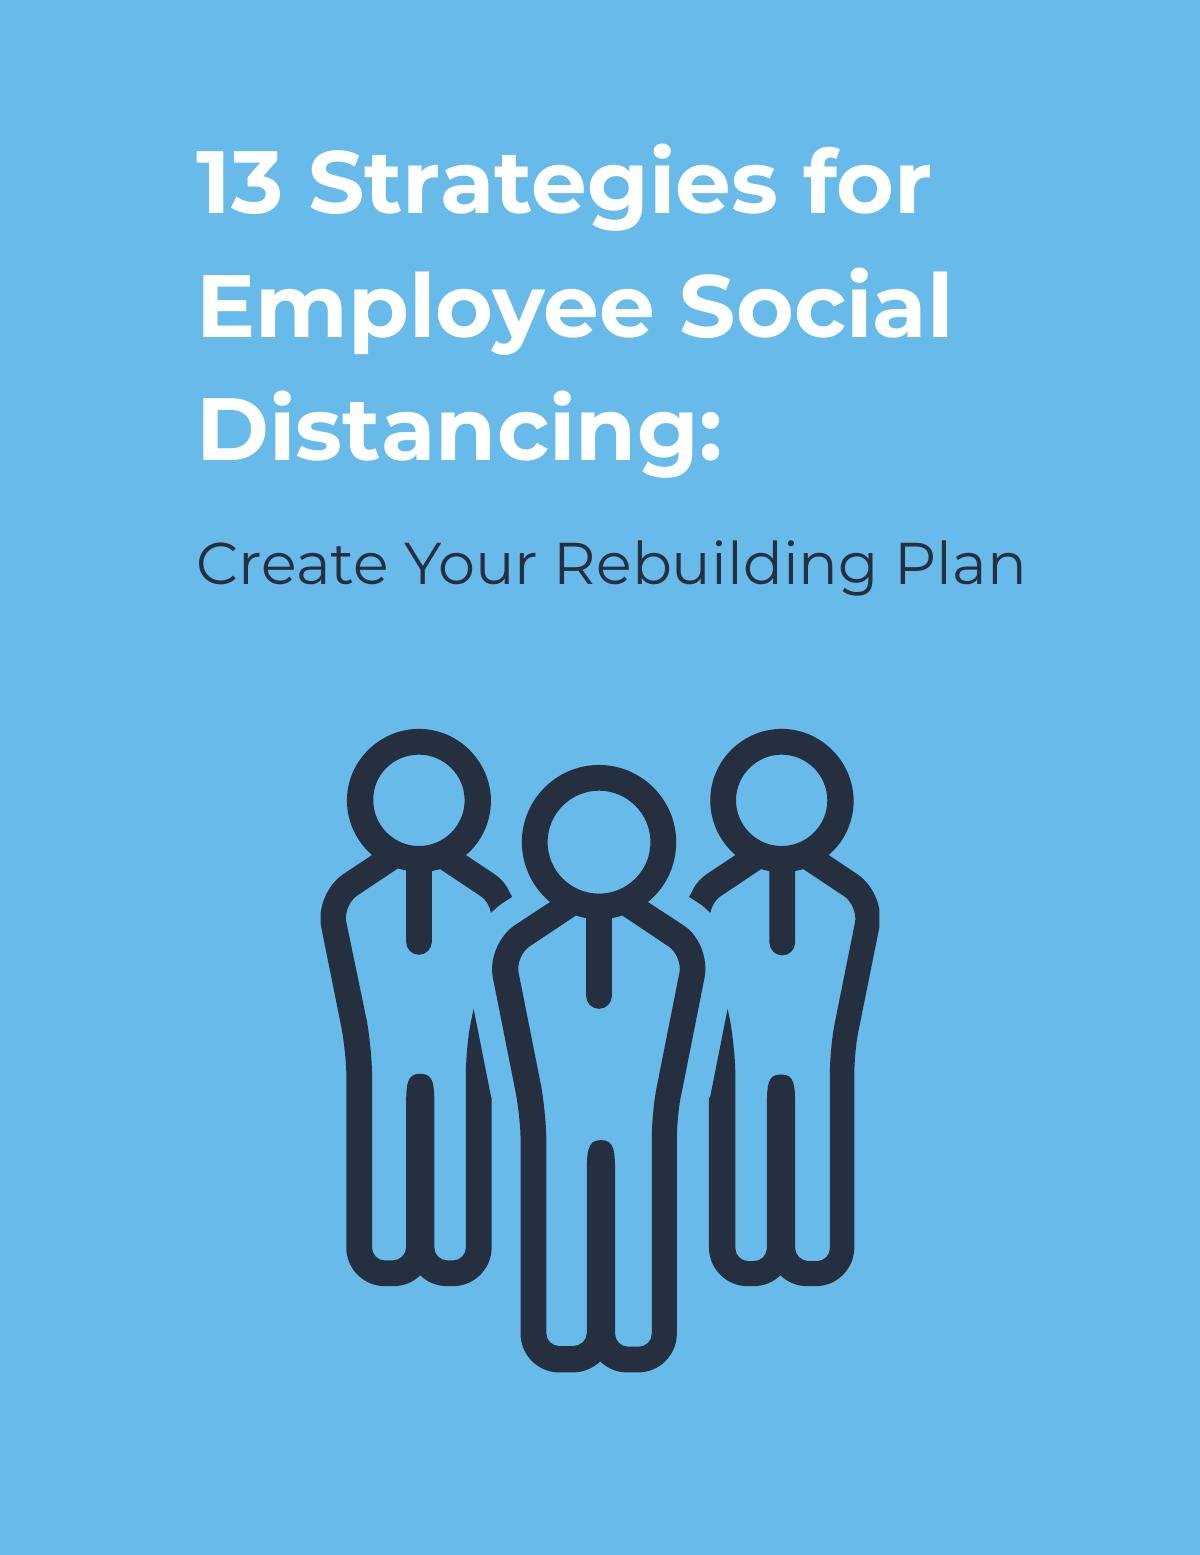 13 Strategies for Employee Social Distancing: Create Your Rebuilding Plan